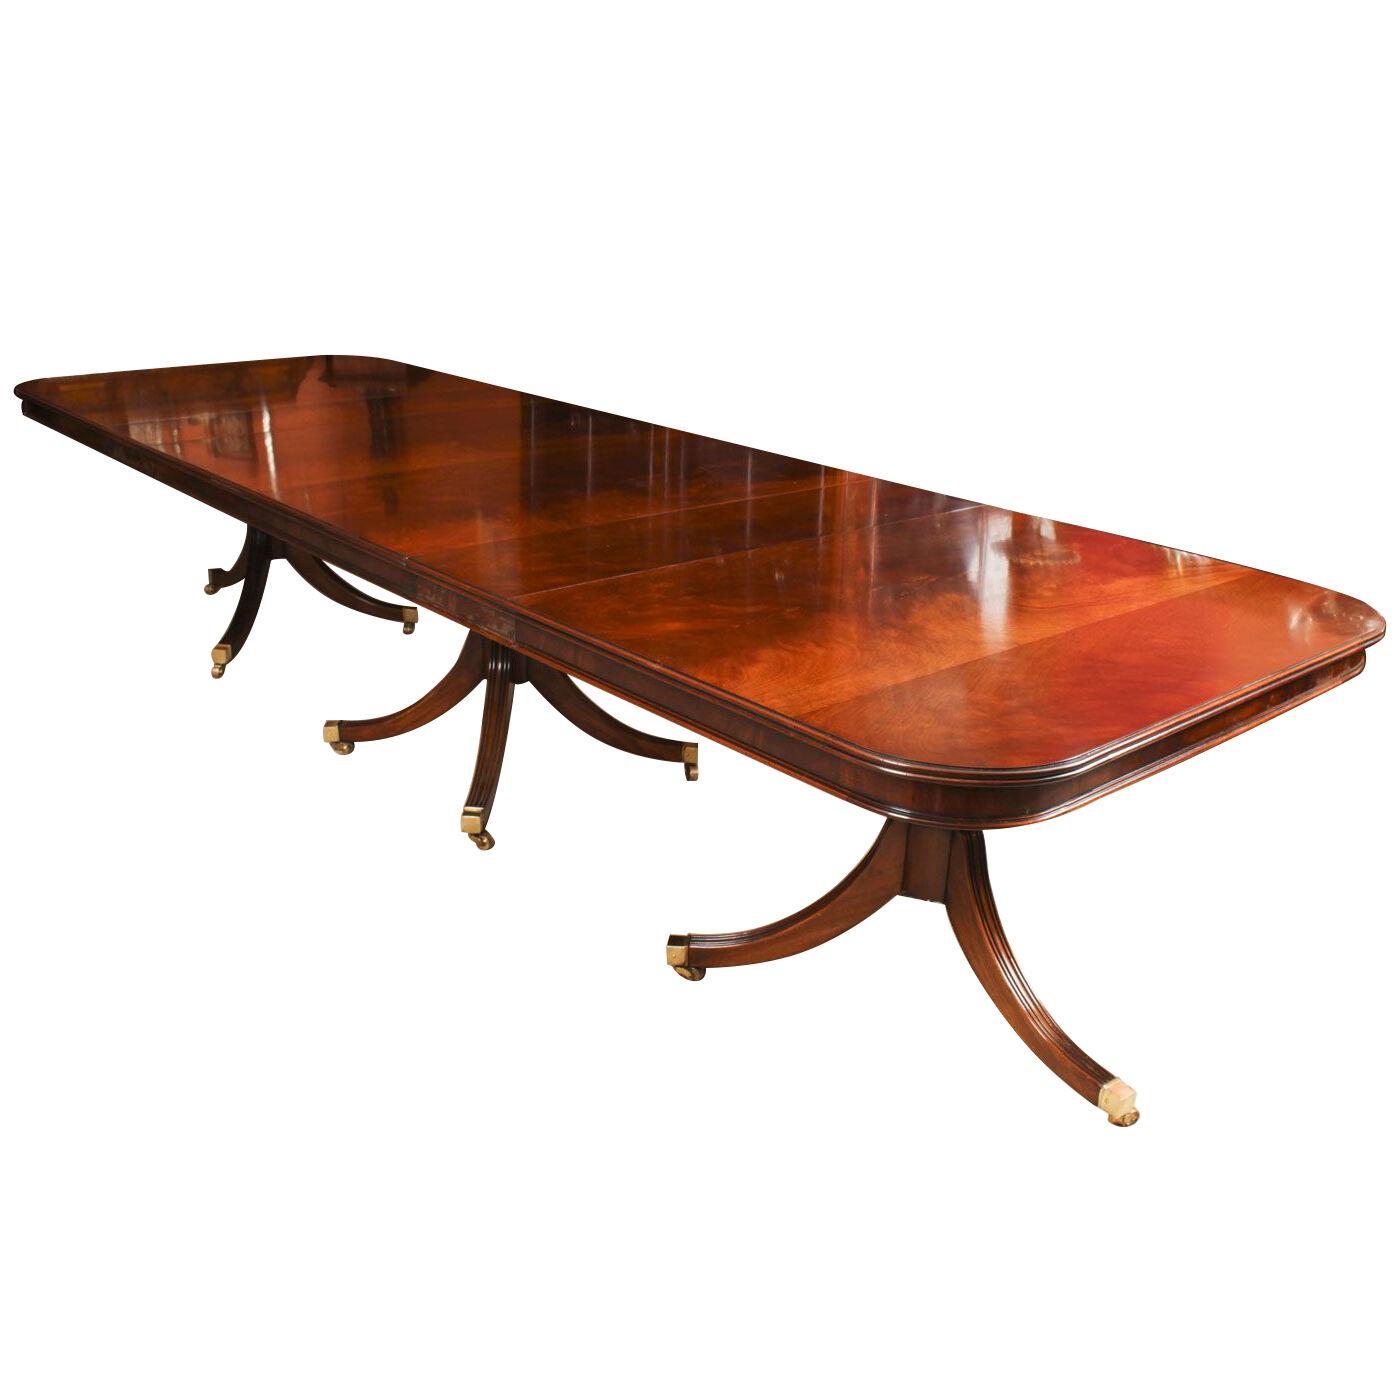 Bespoke 12ft Regency Revival Dining Table Inlaid Flame Mahogany